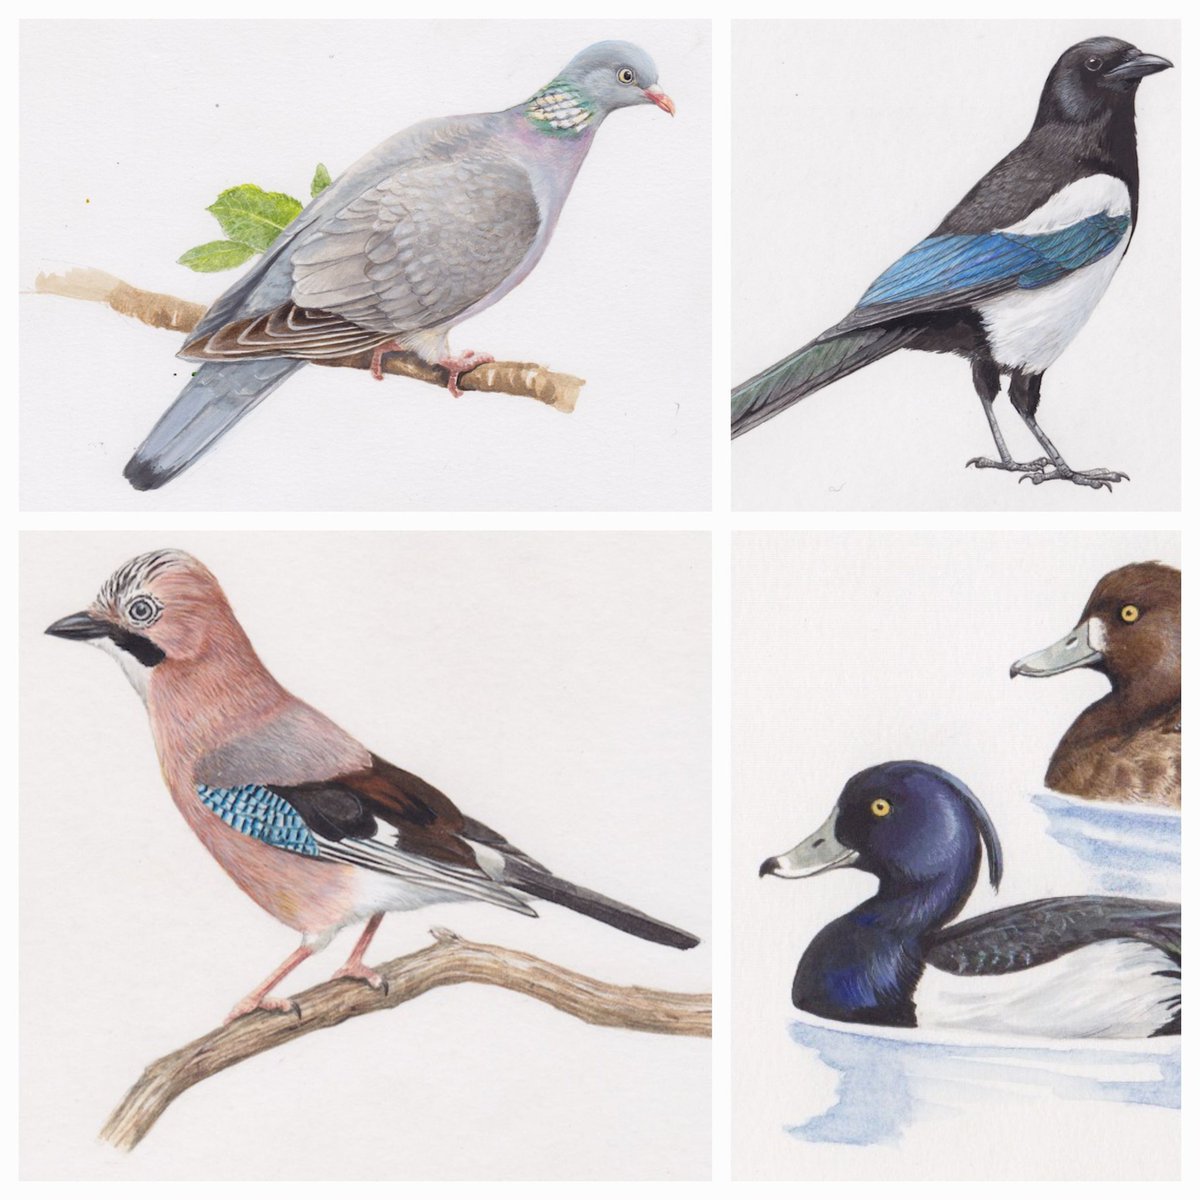 5 #BOU2024 #BREAK1 Species colonising the city since 1930/1940s include those increasing at national scale or some waterbirds. Species with large body size are often among those appearing in the city as newcomers. (Ilustrations by Jan Hošek).